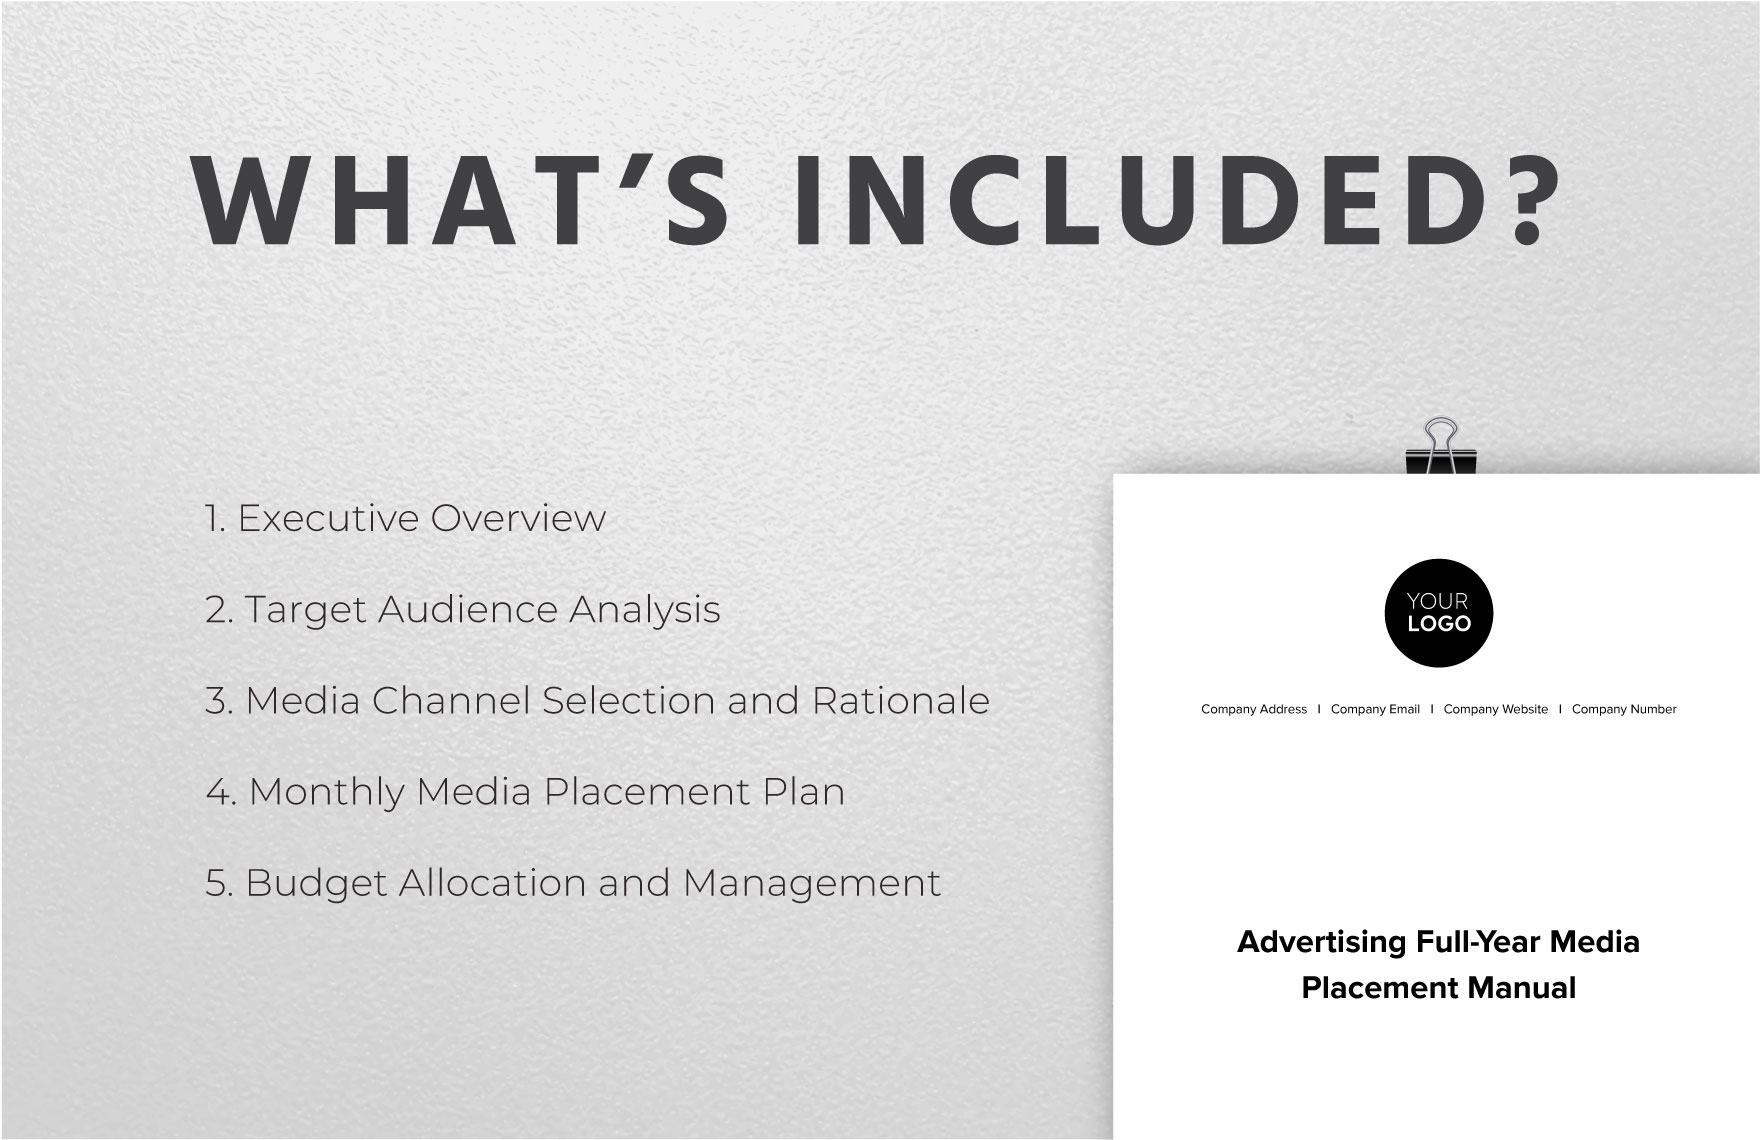 Advertising Full-Year Media Placement Manual Template